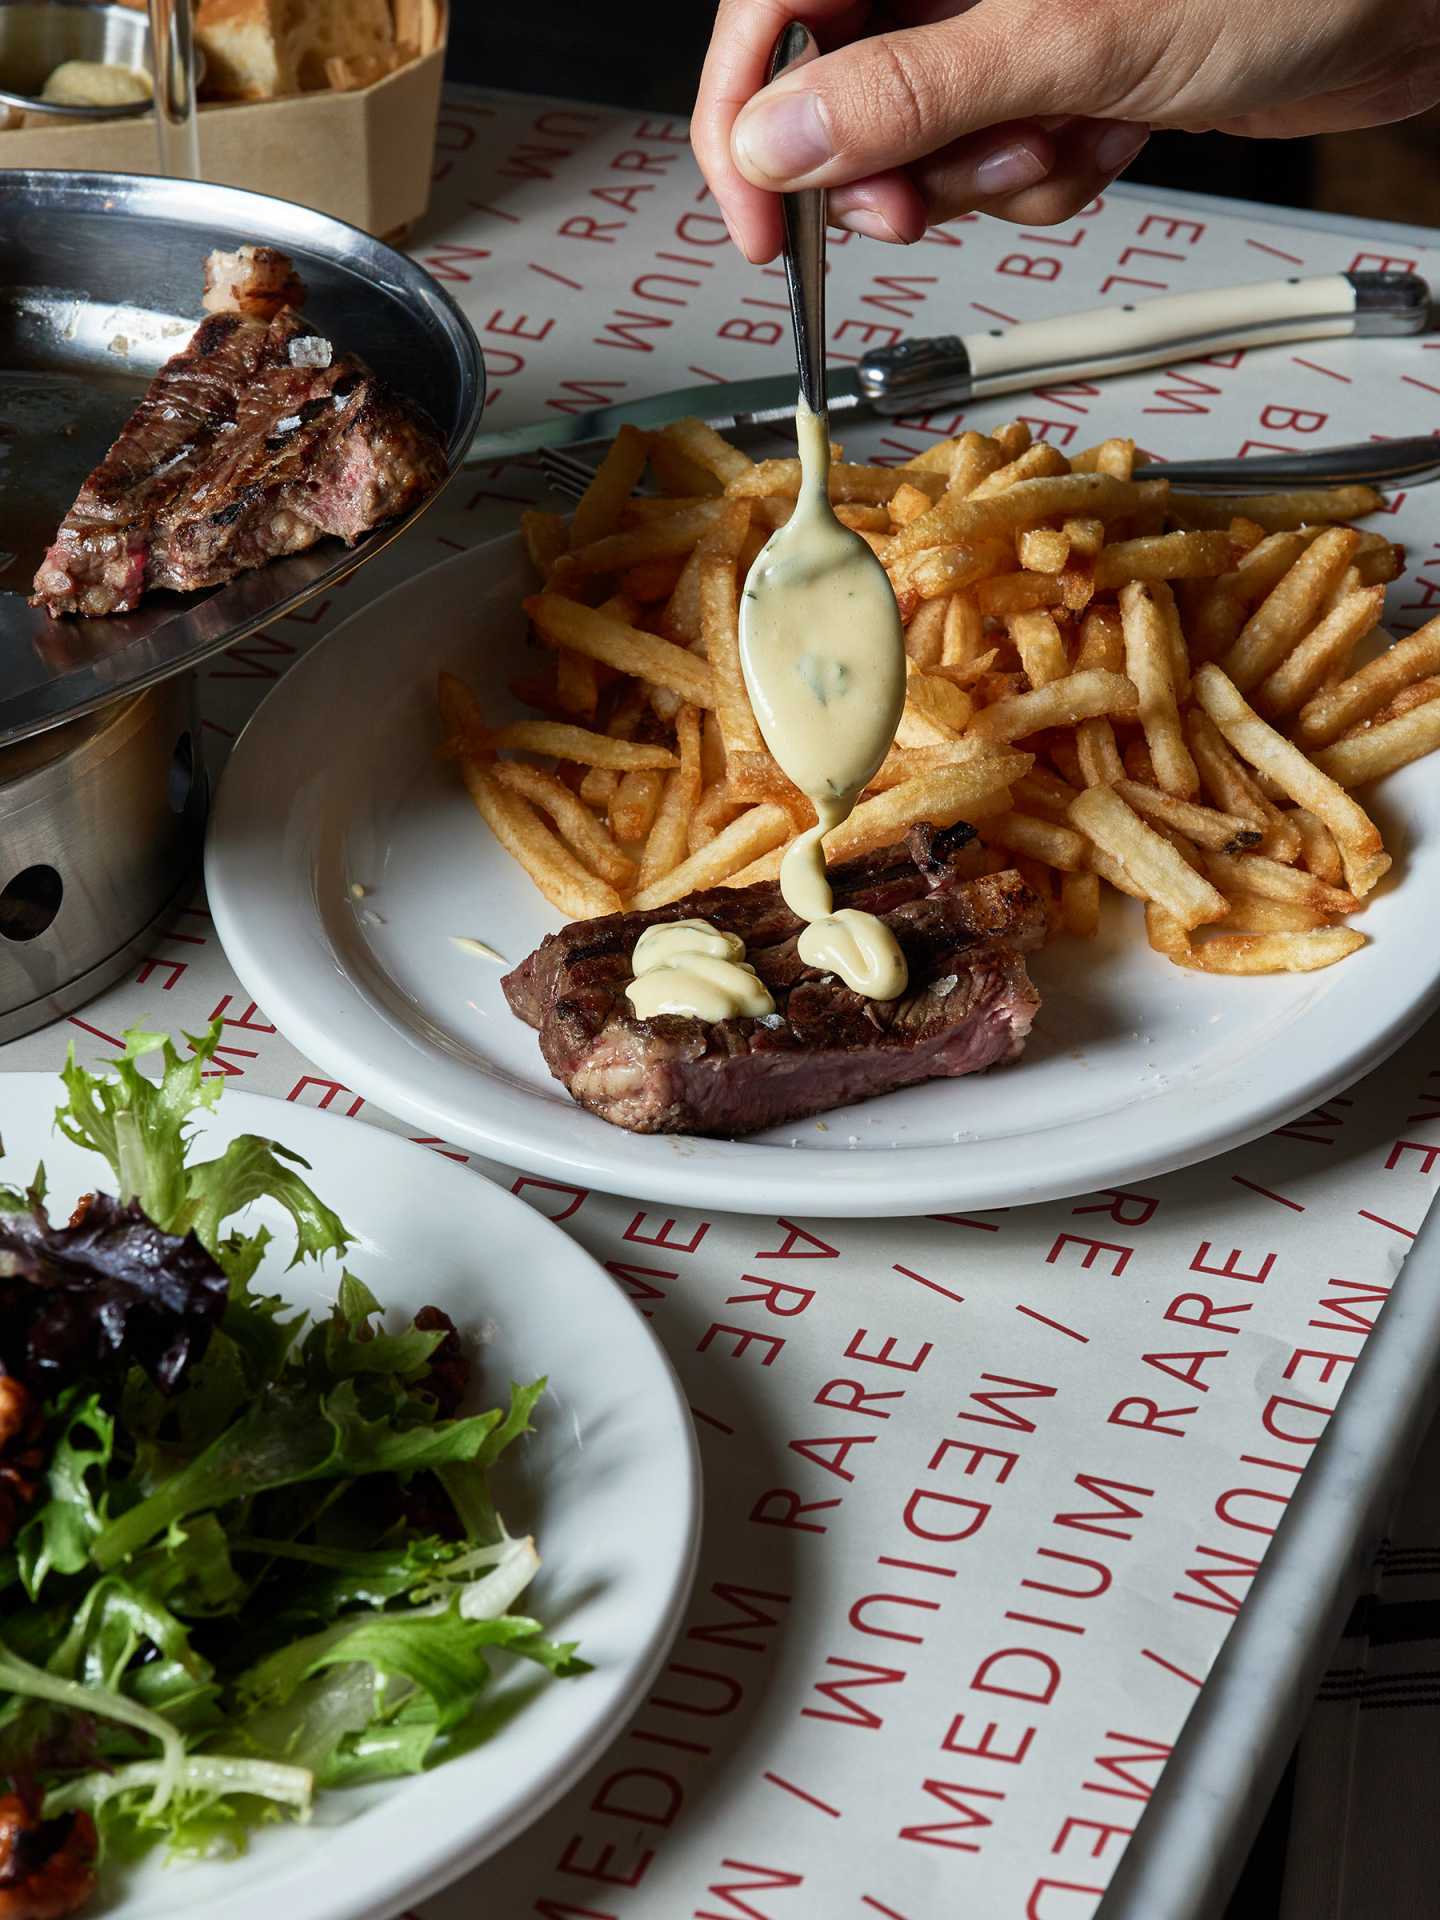 Best new Toronto restaurants | A plate of steak at J's Steak Frites topped with sauce